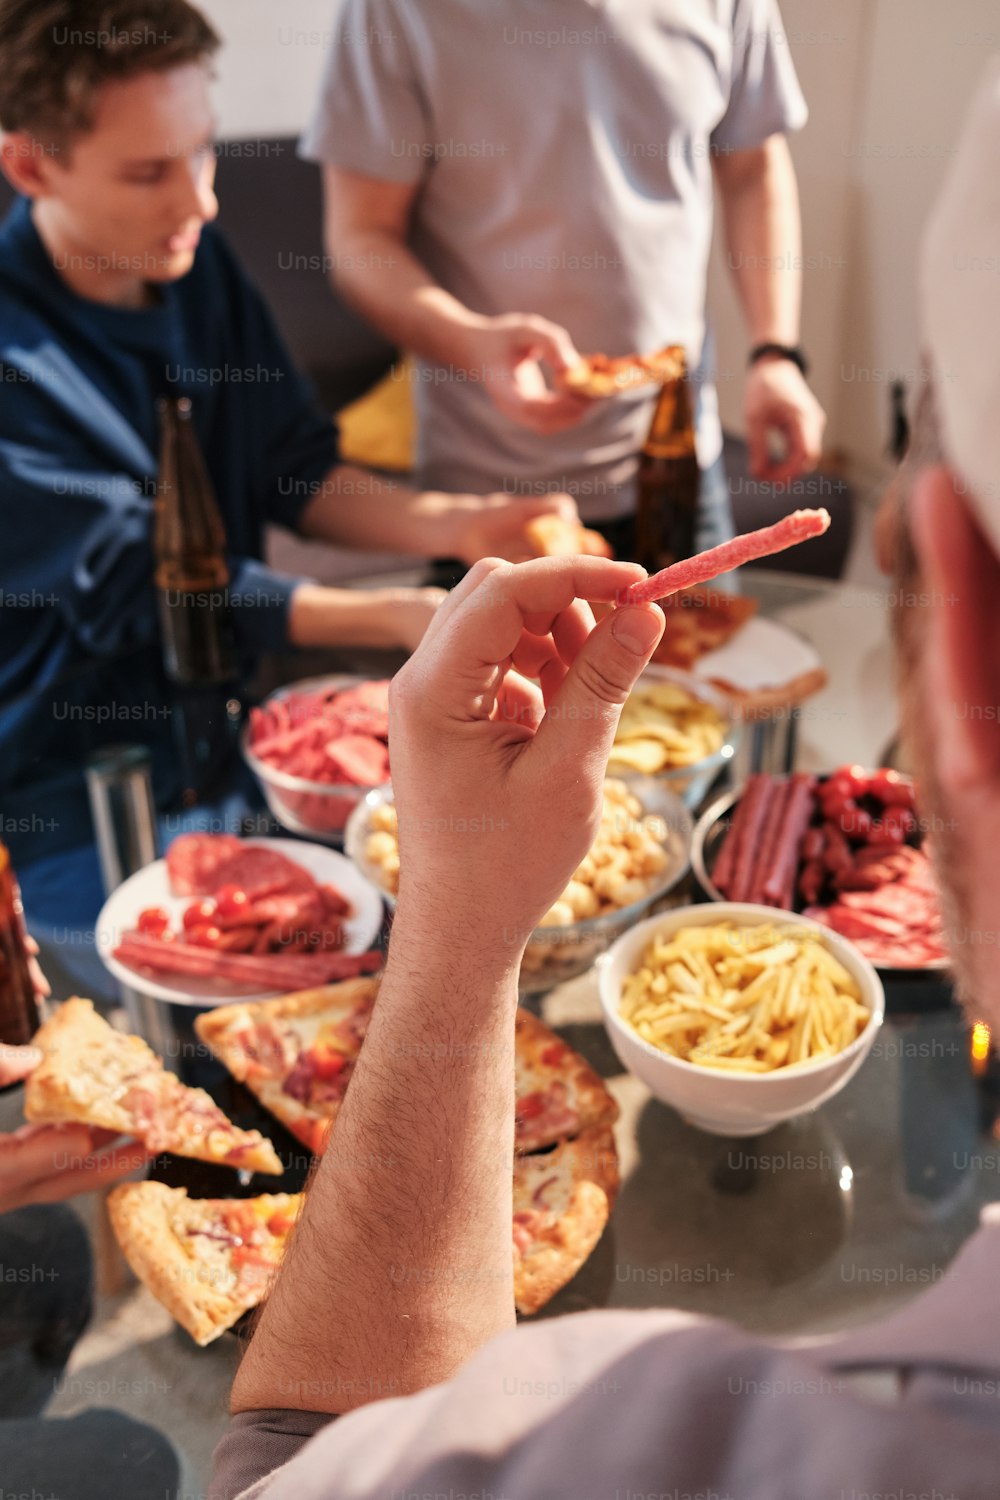 a group of people standing around a table filled with food